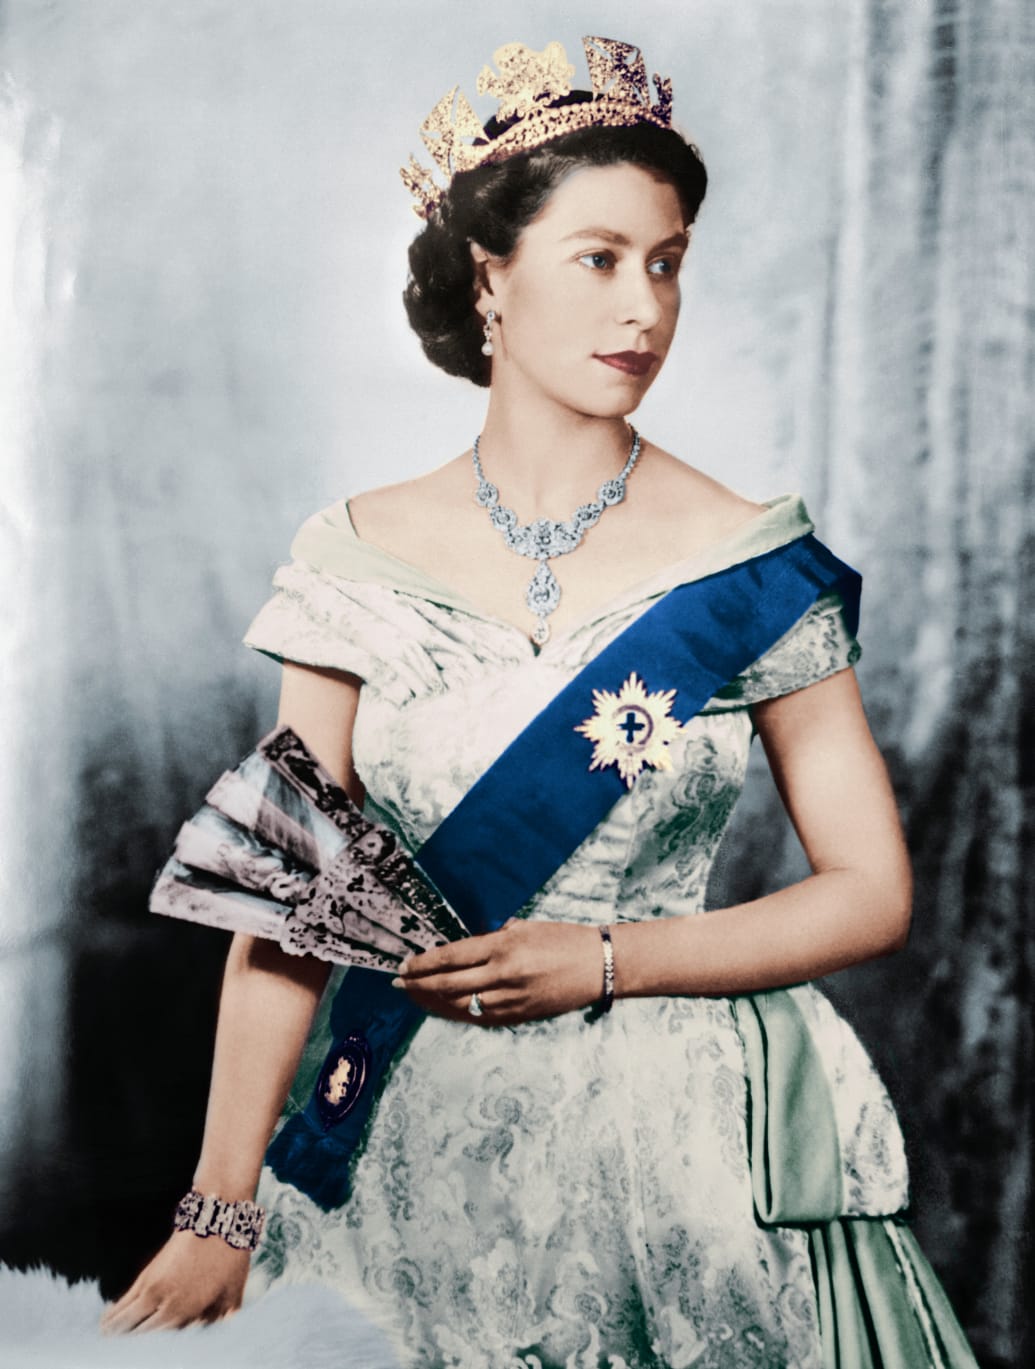 Queen Elizabeth Remained A Mystery Her Entire Life Just As She Intended